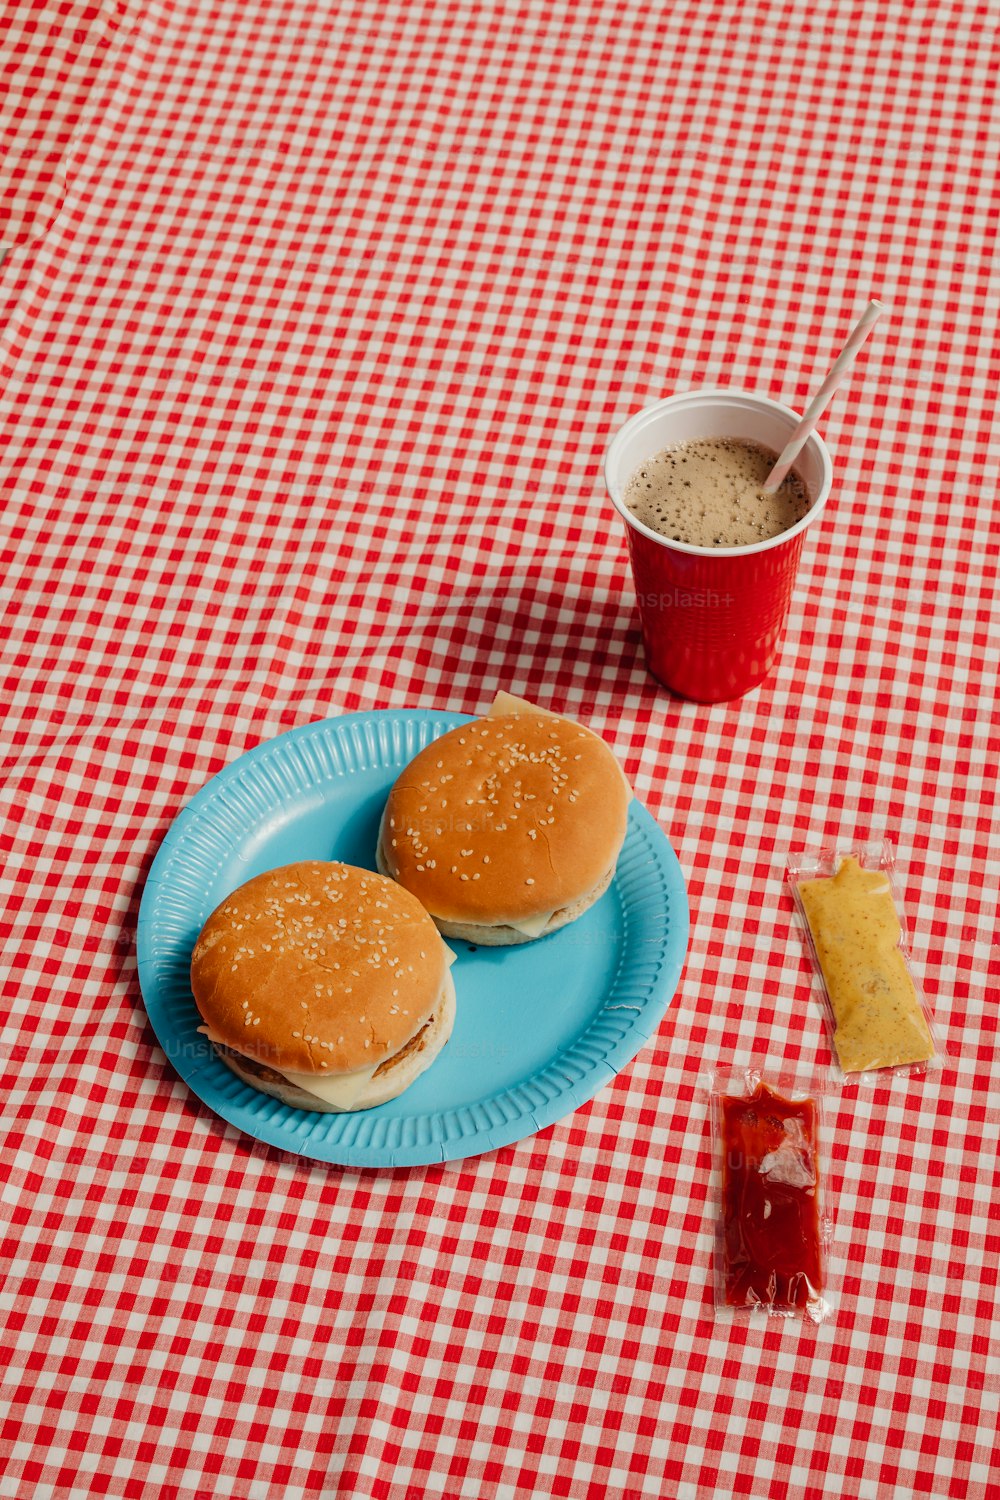 two hamburgers on a blue plate next to a cup of coffee